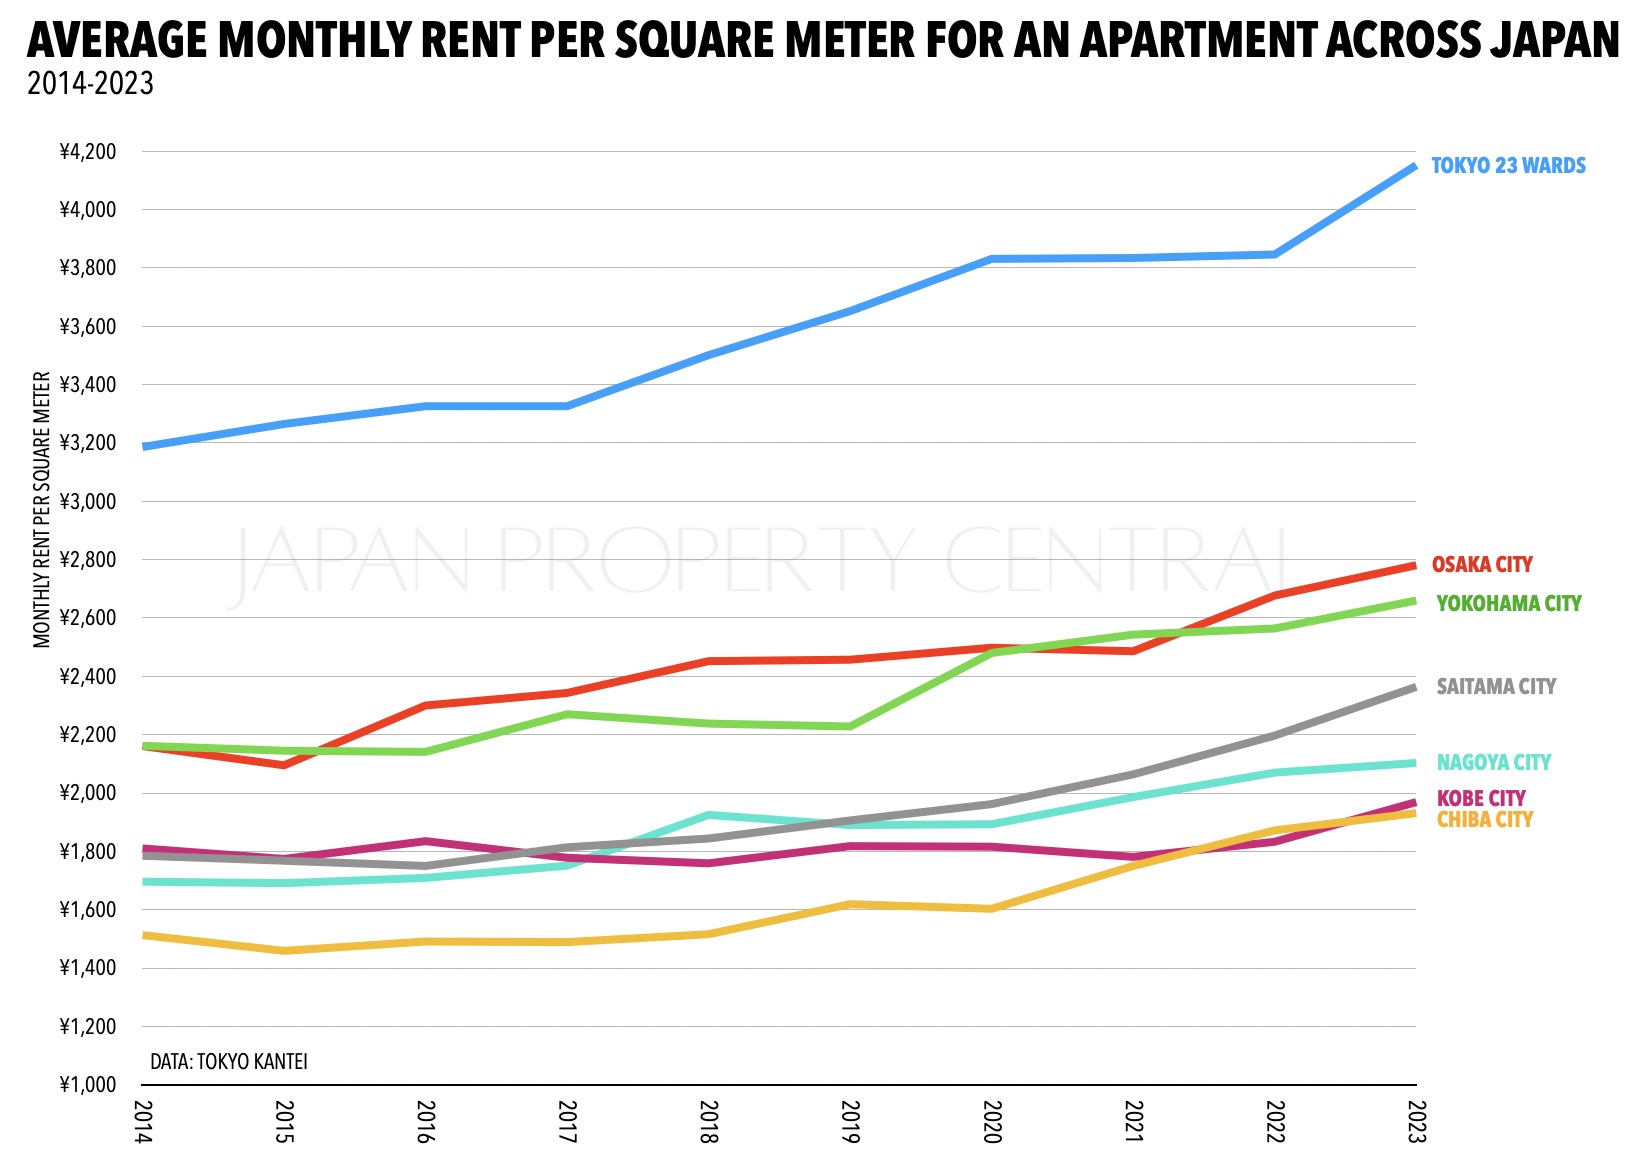 Apartment rents in Tokyo reach record high in 2023 – JAPAN PROPERTY CENTRAL K.K.